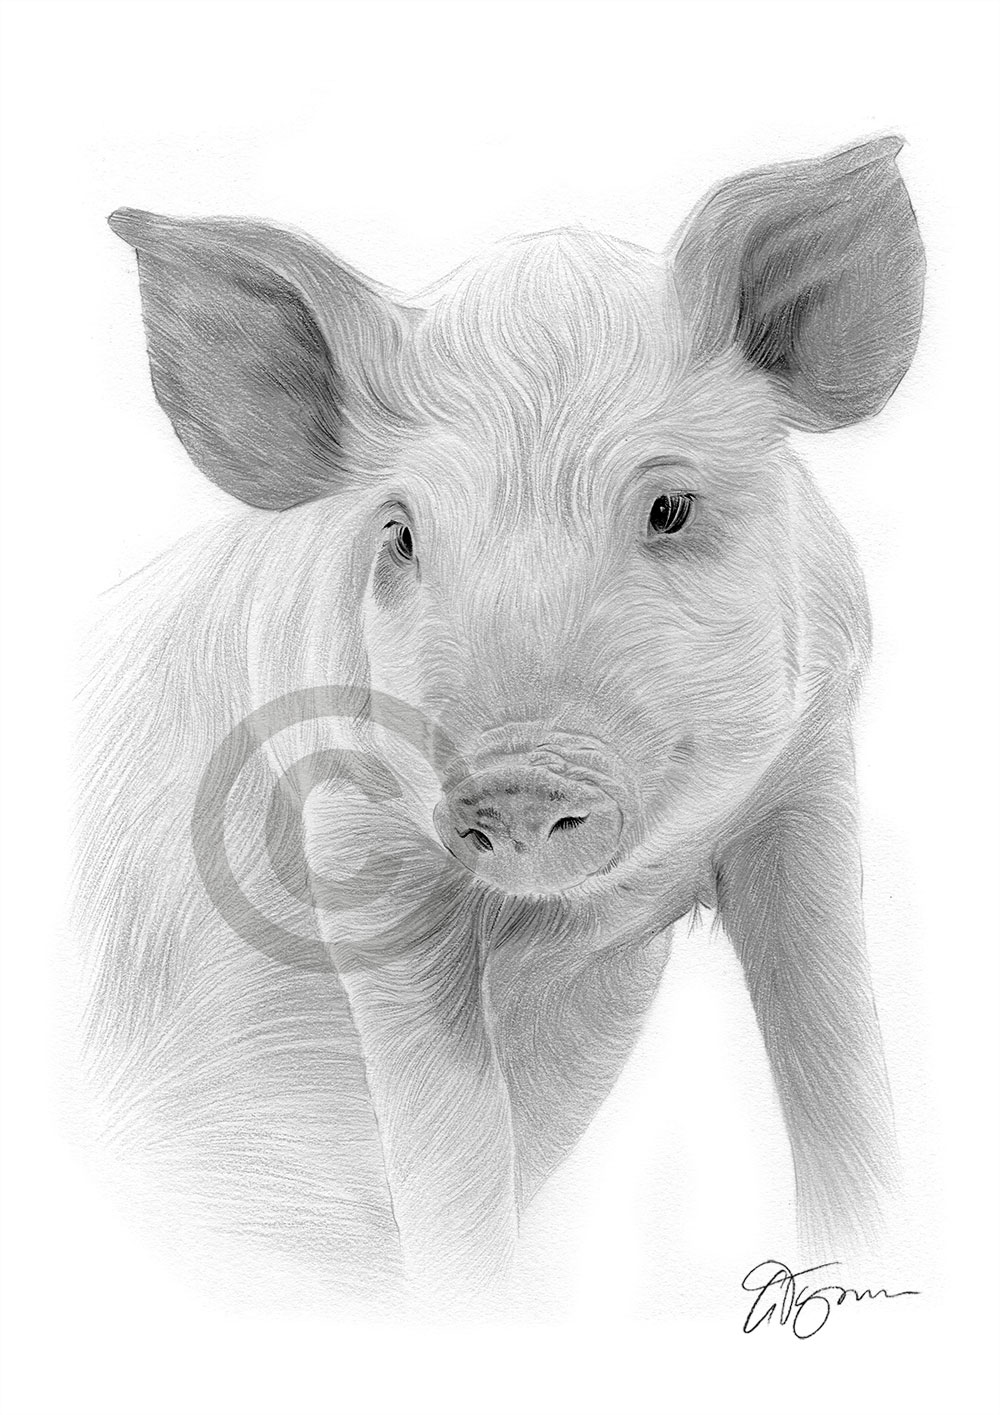 Pencil drawing of a pig by artist Gary Tymon